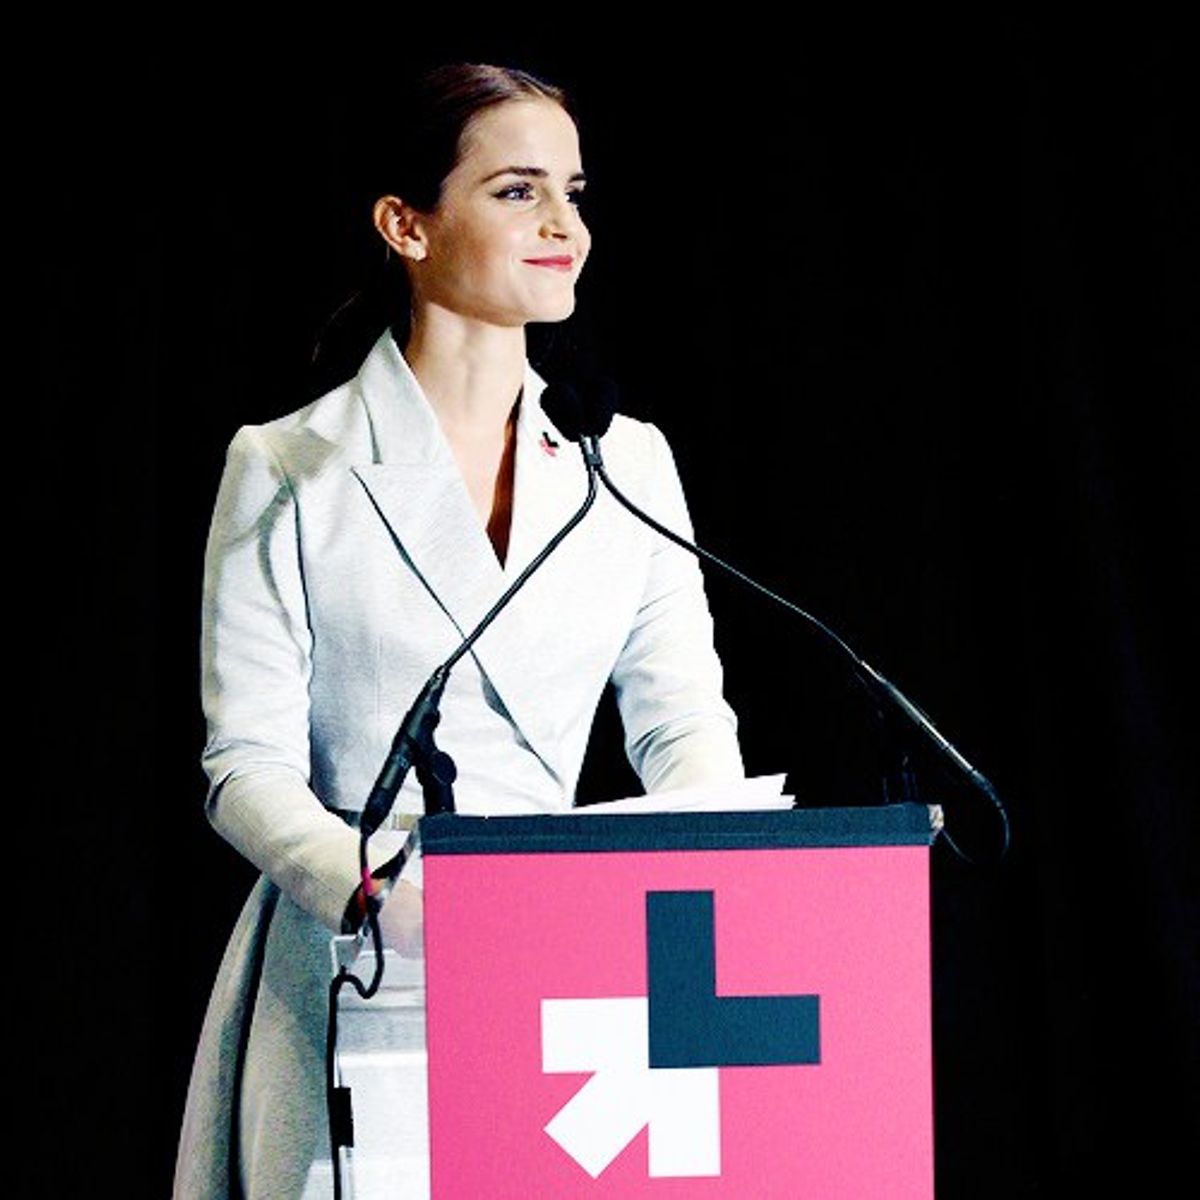 Why Emma Watson's HeForShe Campaign Is Important